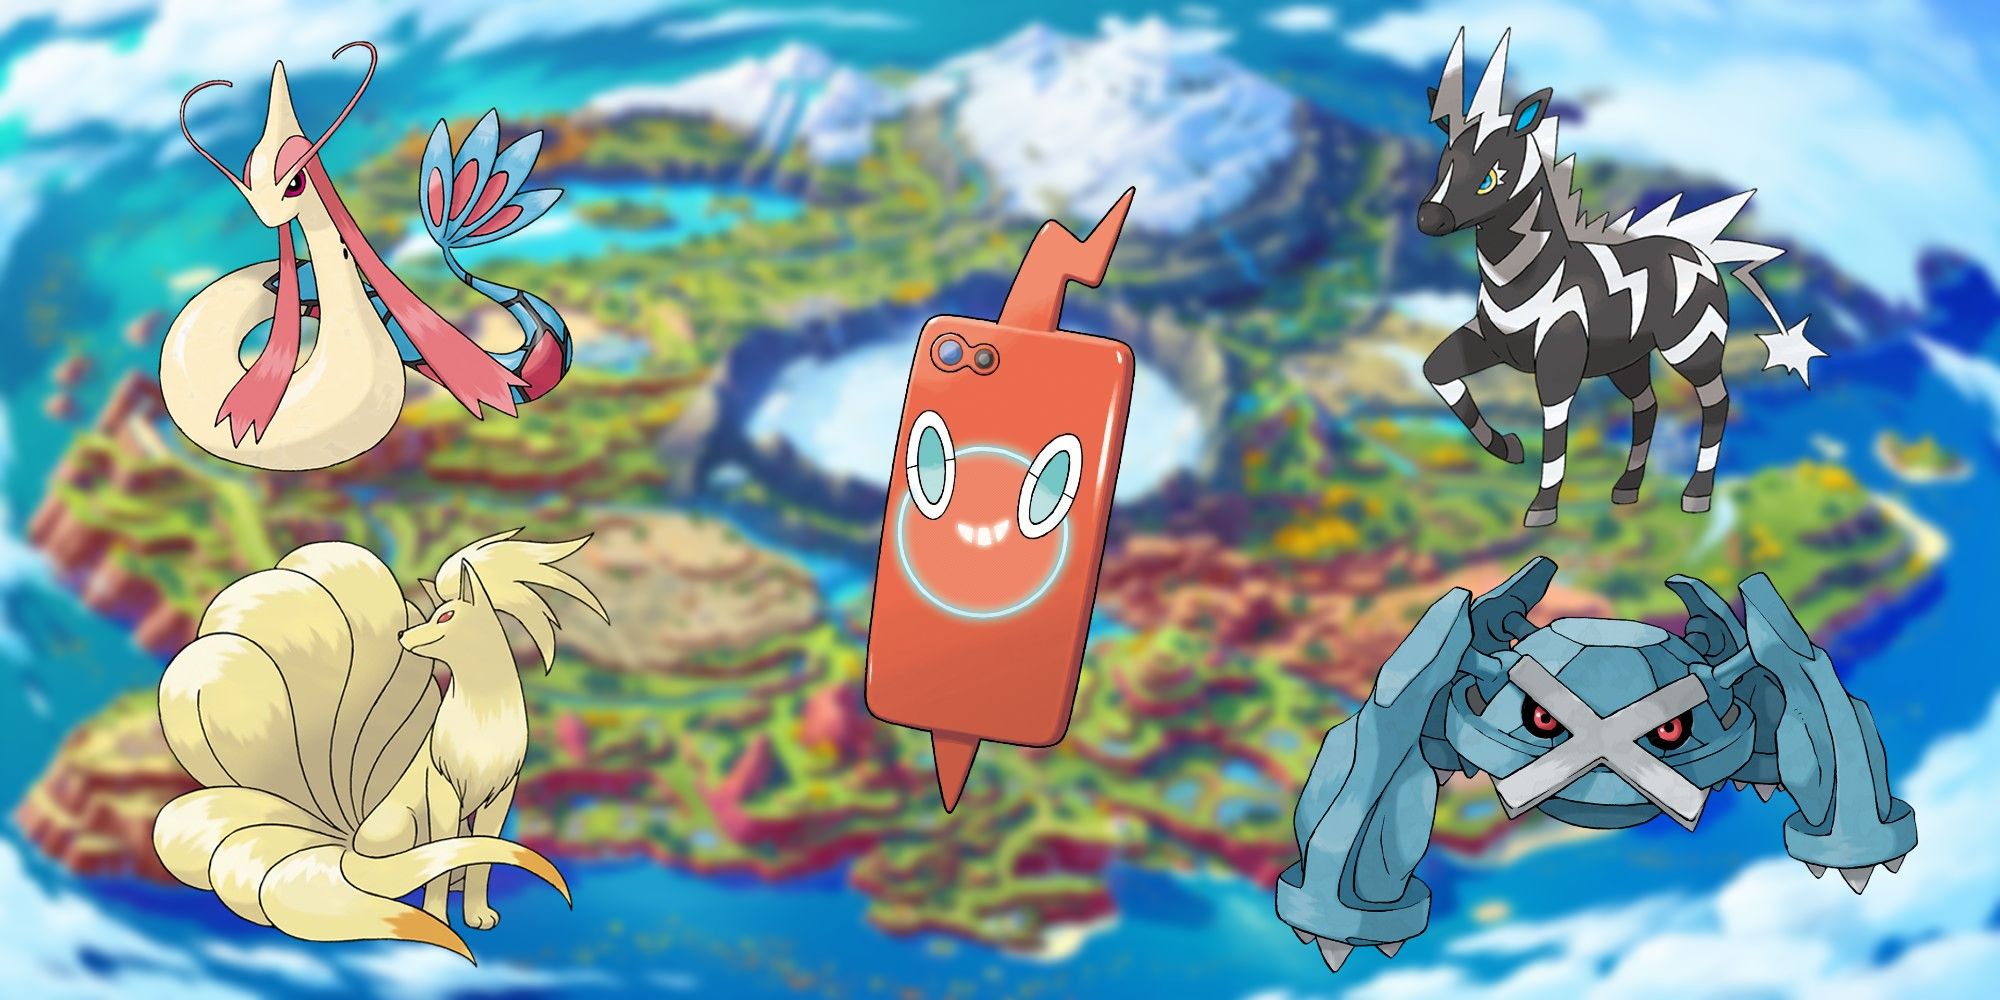 Pokémon Scarlet and Violet's Paldea region with the Rotom Phone/Pokedex edited with Milotic, Ninetails, Zebstrika, and Metagross.